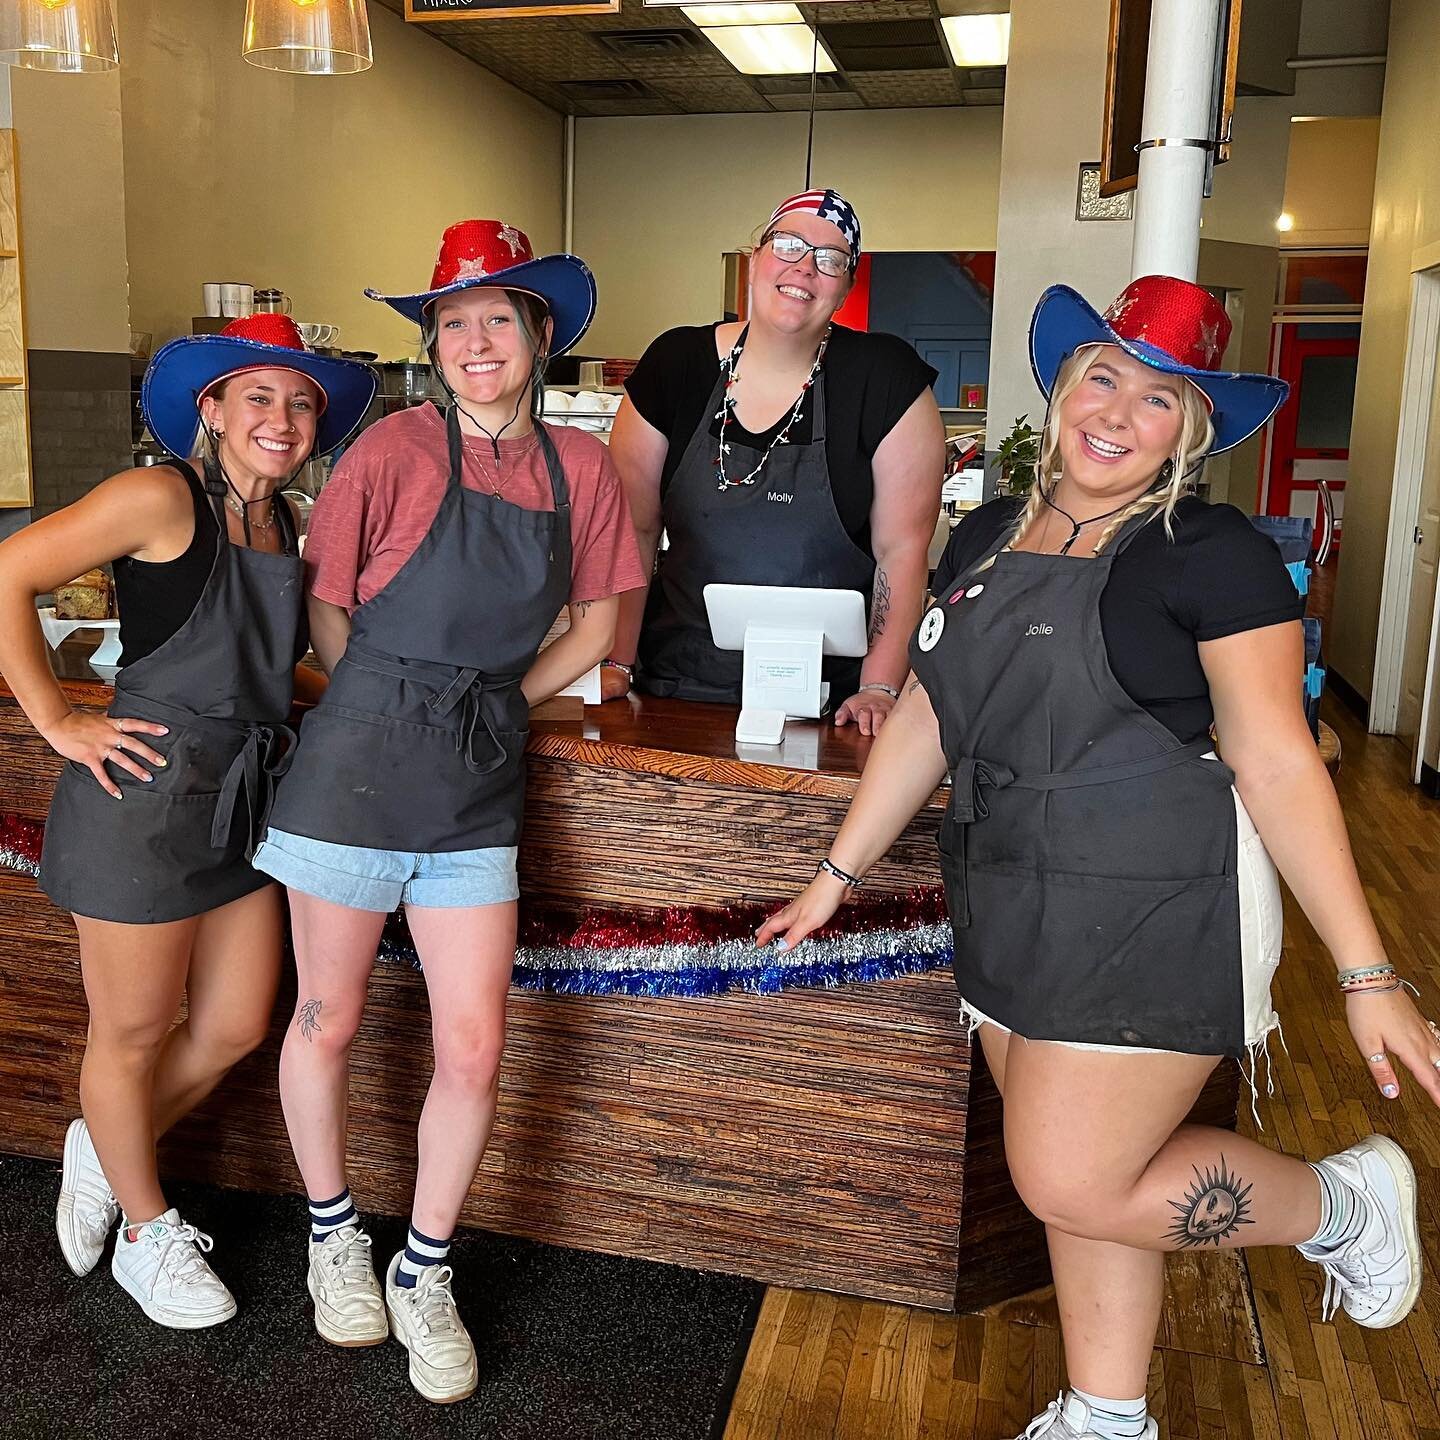 Happy fourth! Big thanks to our incredible crew Jolie, Abby, Ali, Molly, Elizabeth and Olivia celebrating and slinging drinks at both locations today. ❤️🤍💙